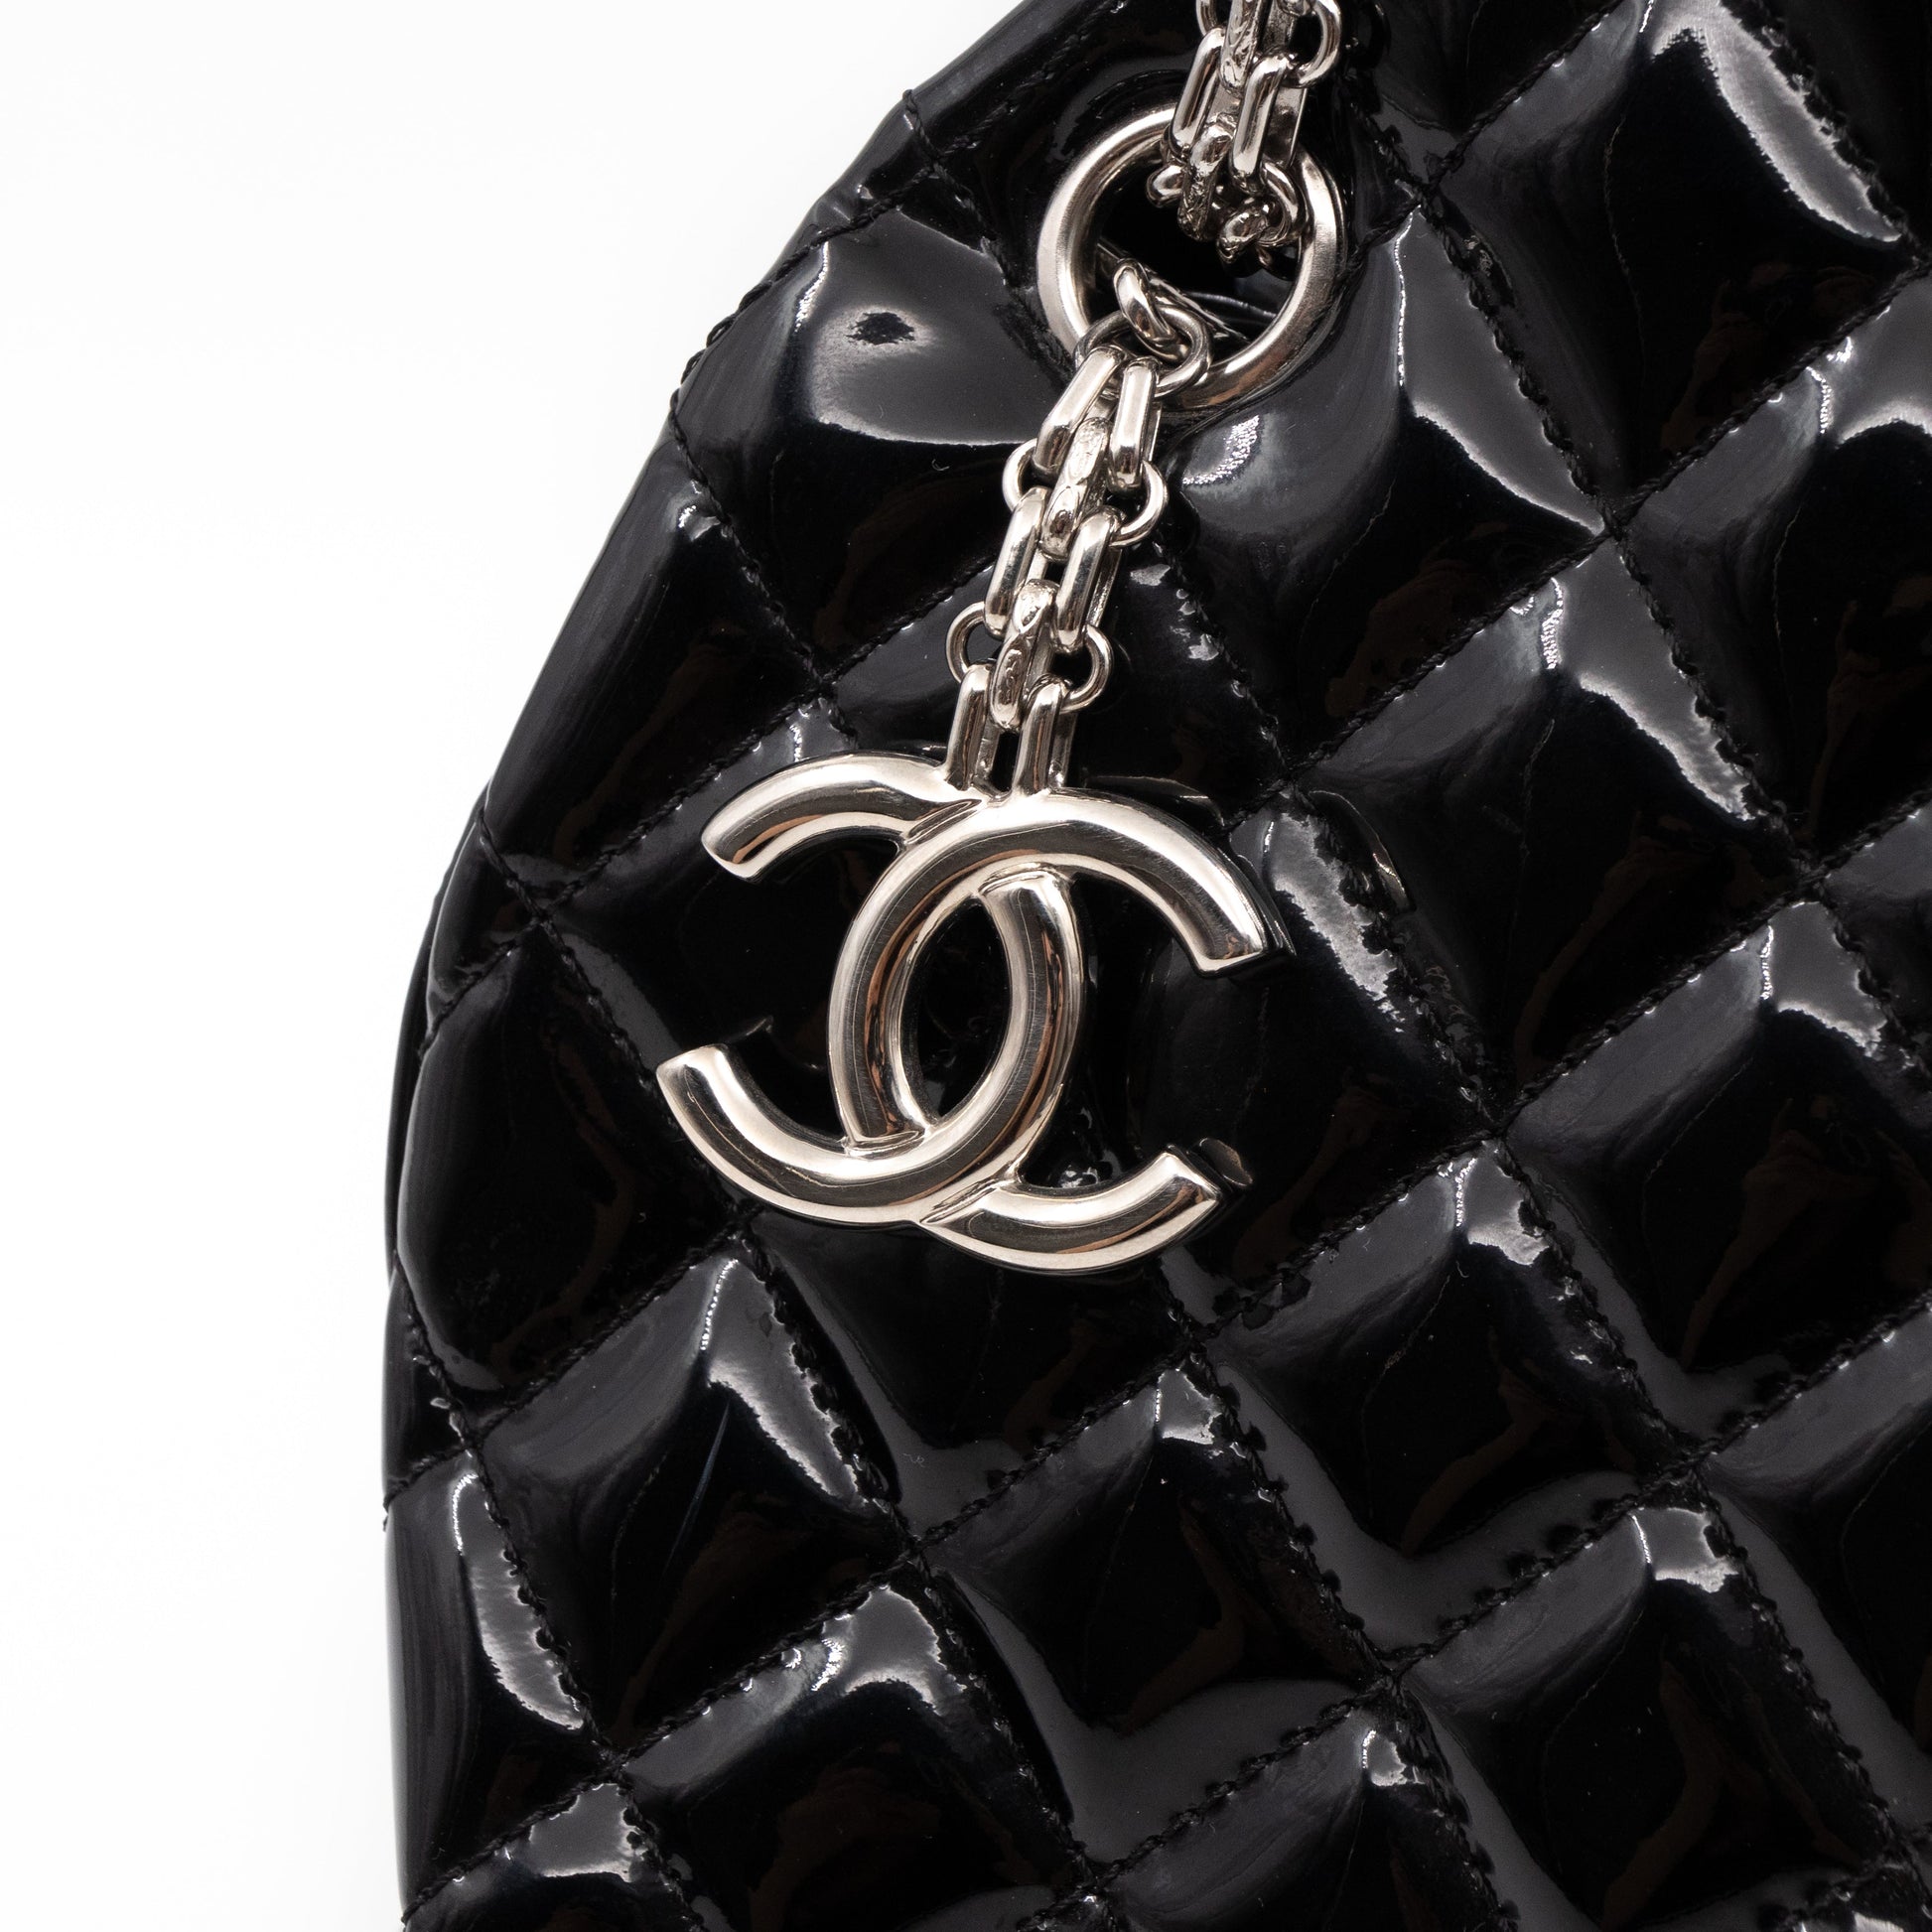 just mademoiselle chanel bag authentic